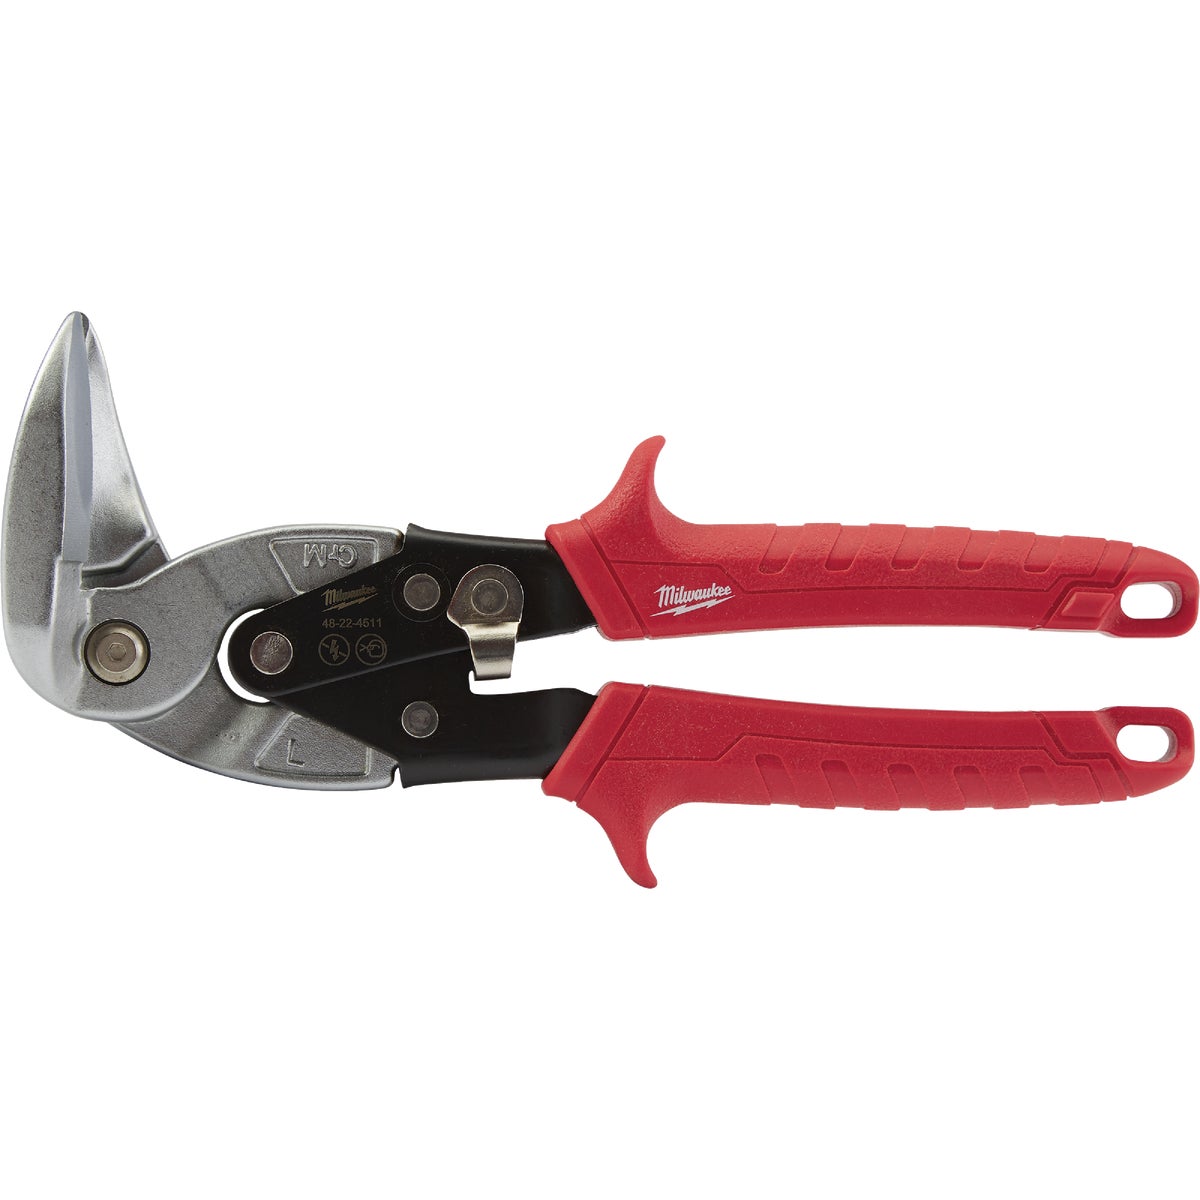 Item 302706, Snips feature forged alloy steel cutting heads for maximum strength and 